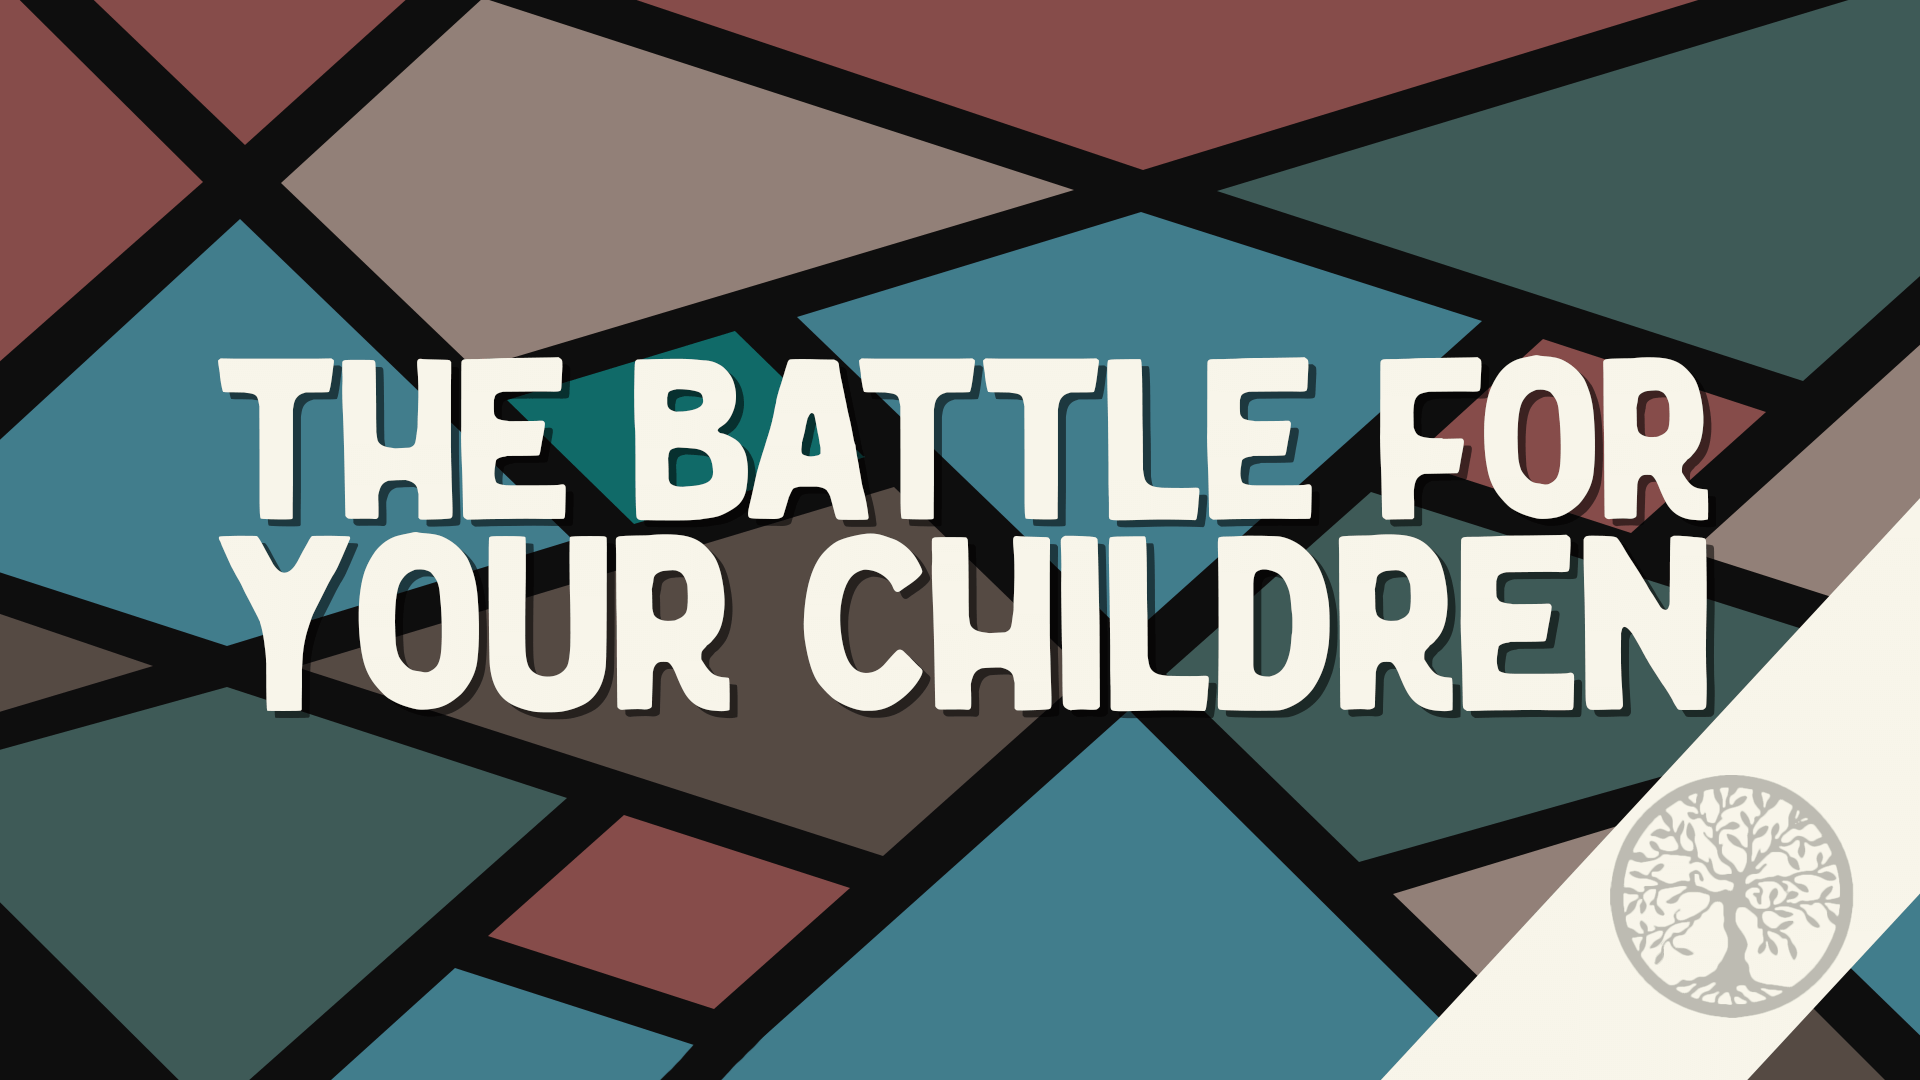 The Battle for Your Children